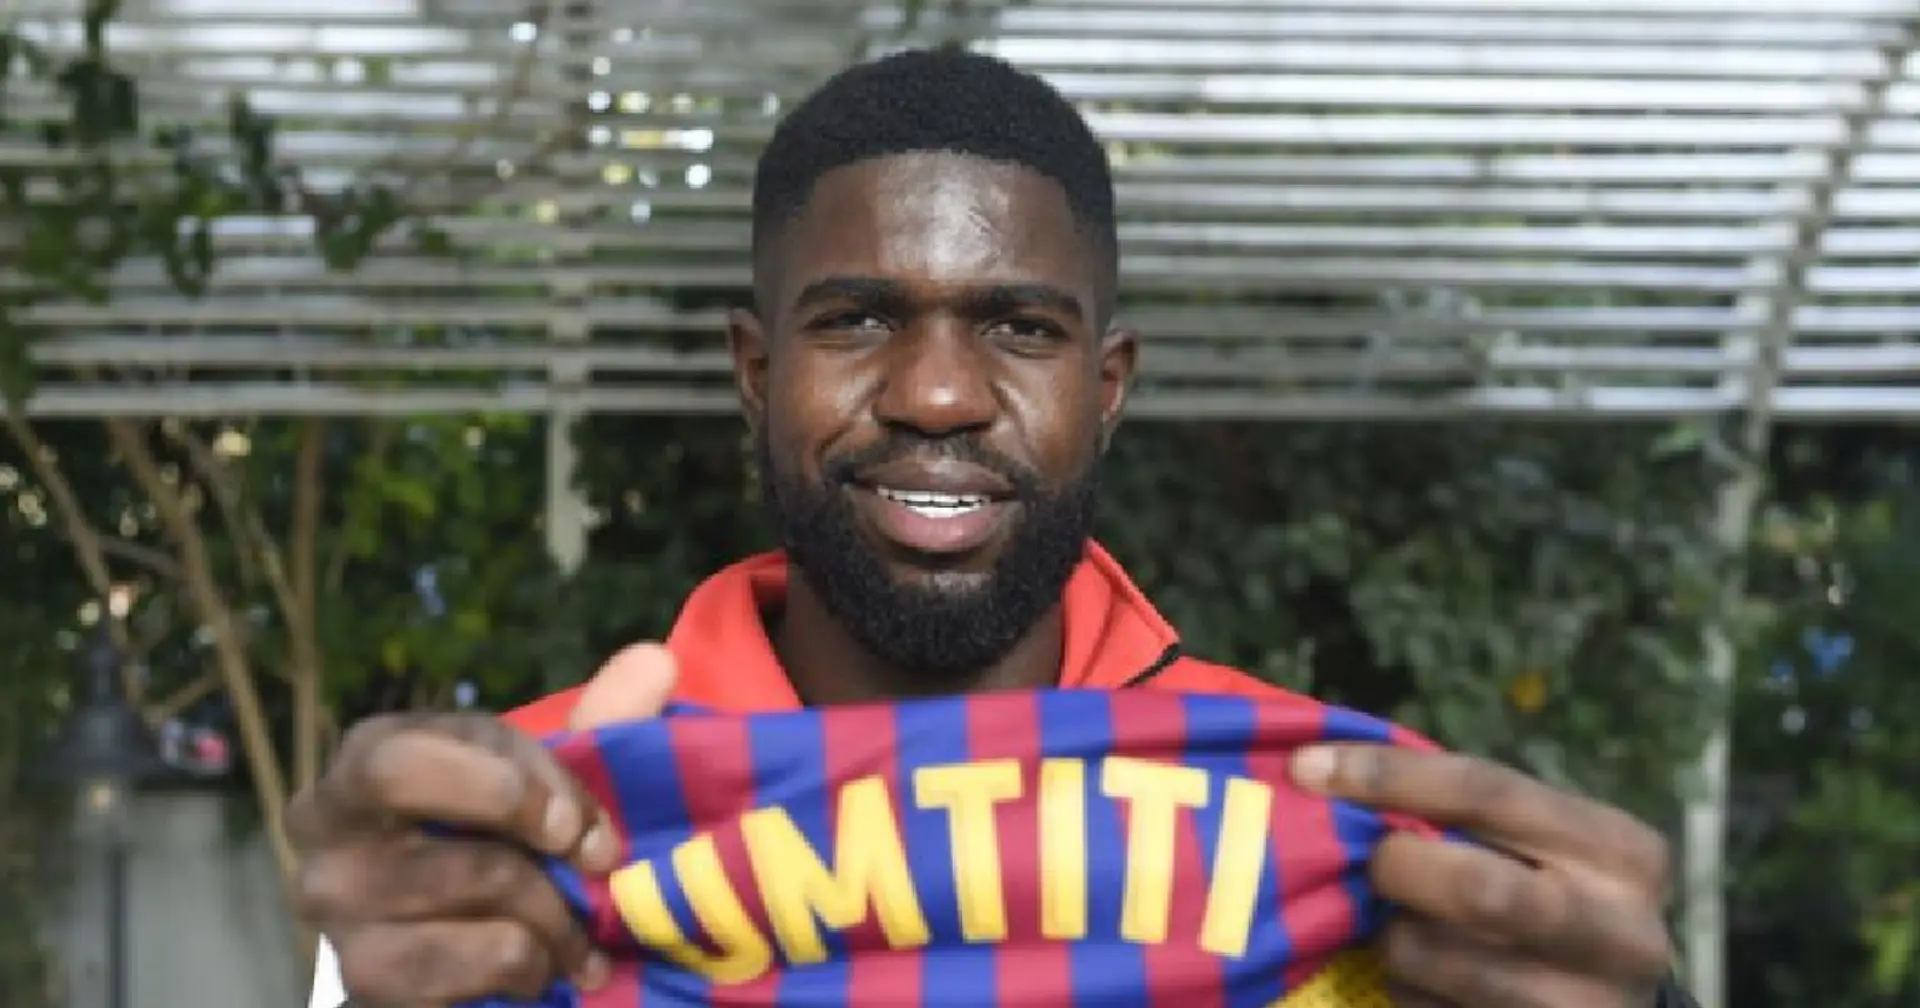 Umtiti to join Lecce, Barca will pay his wages but there's a catch (reliability: 4 stars)